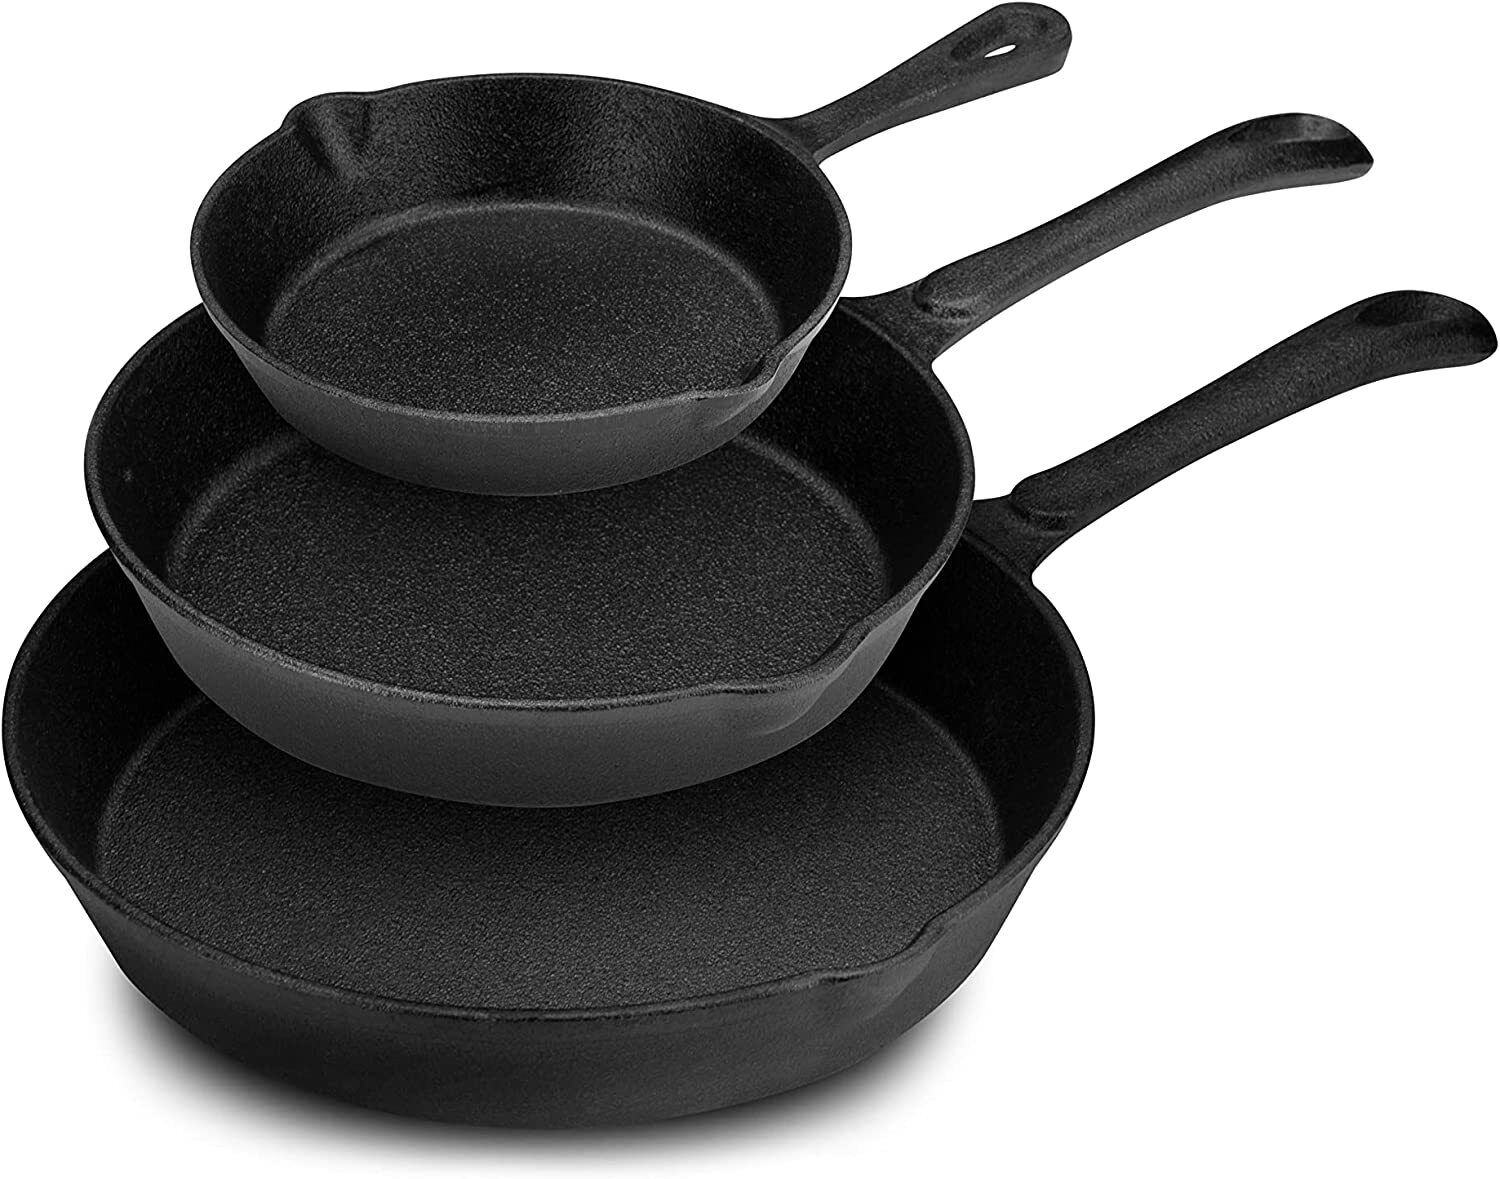 Cast Iron Skillet Set 3 Piece Nonstick Pre-Seasoned Pan Frying Camping Cooking